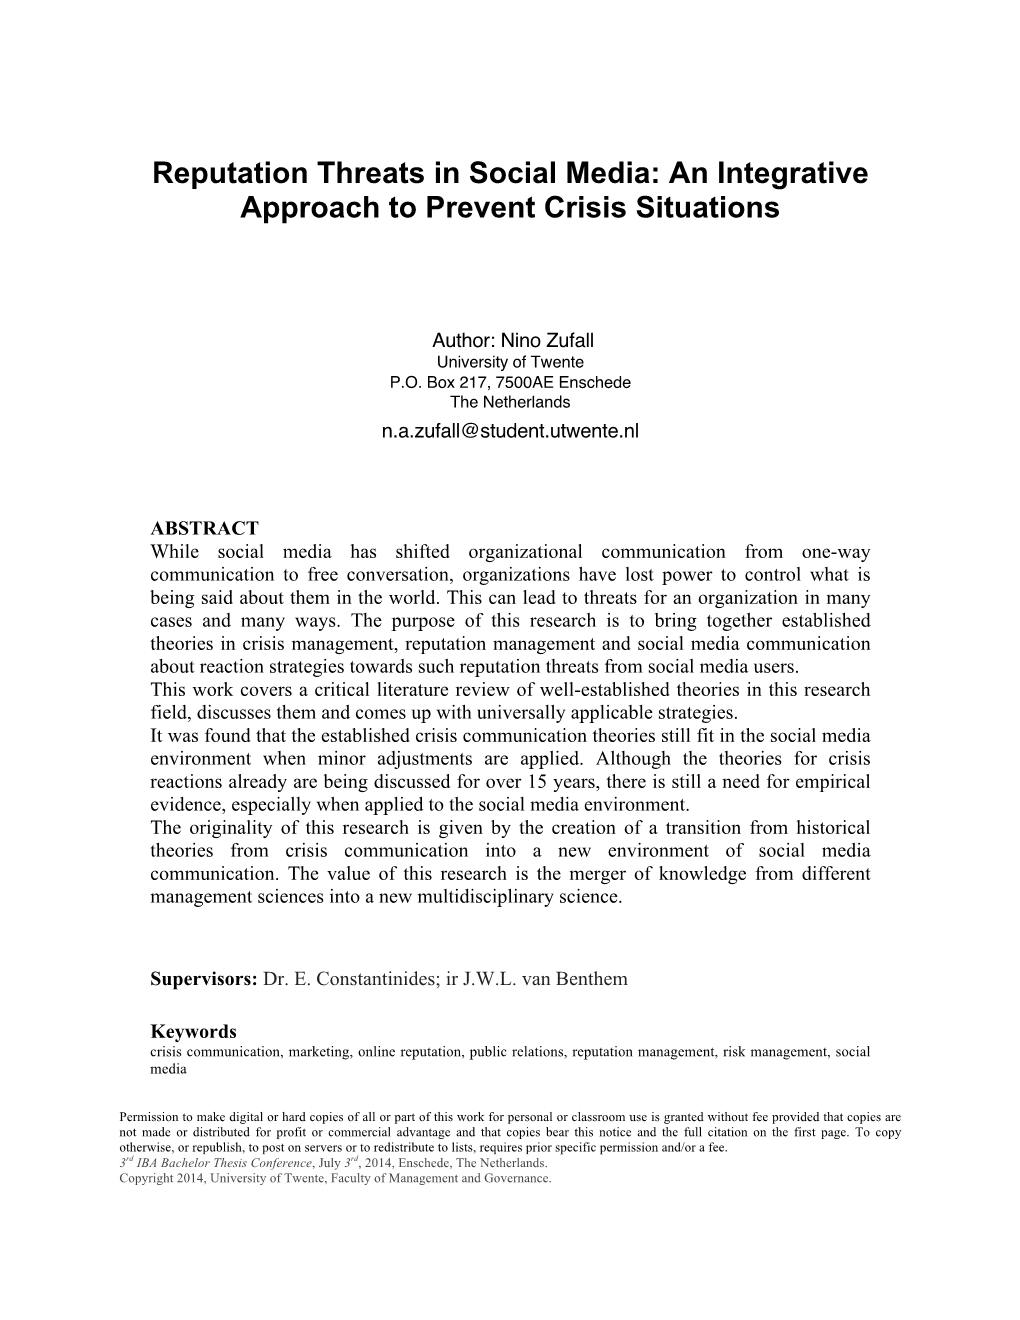 Reputation Threats in Social Media: an Integrative Approach to Prevent Crisis Situations